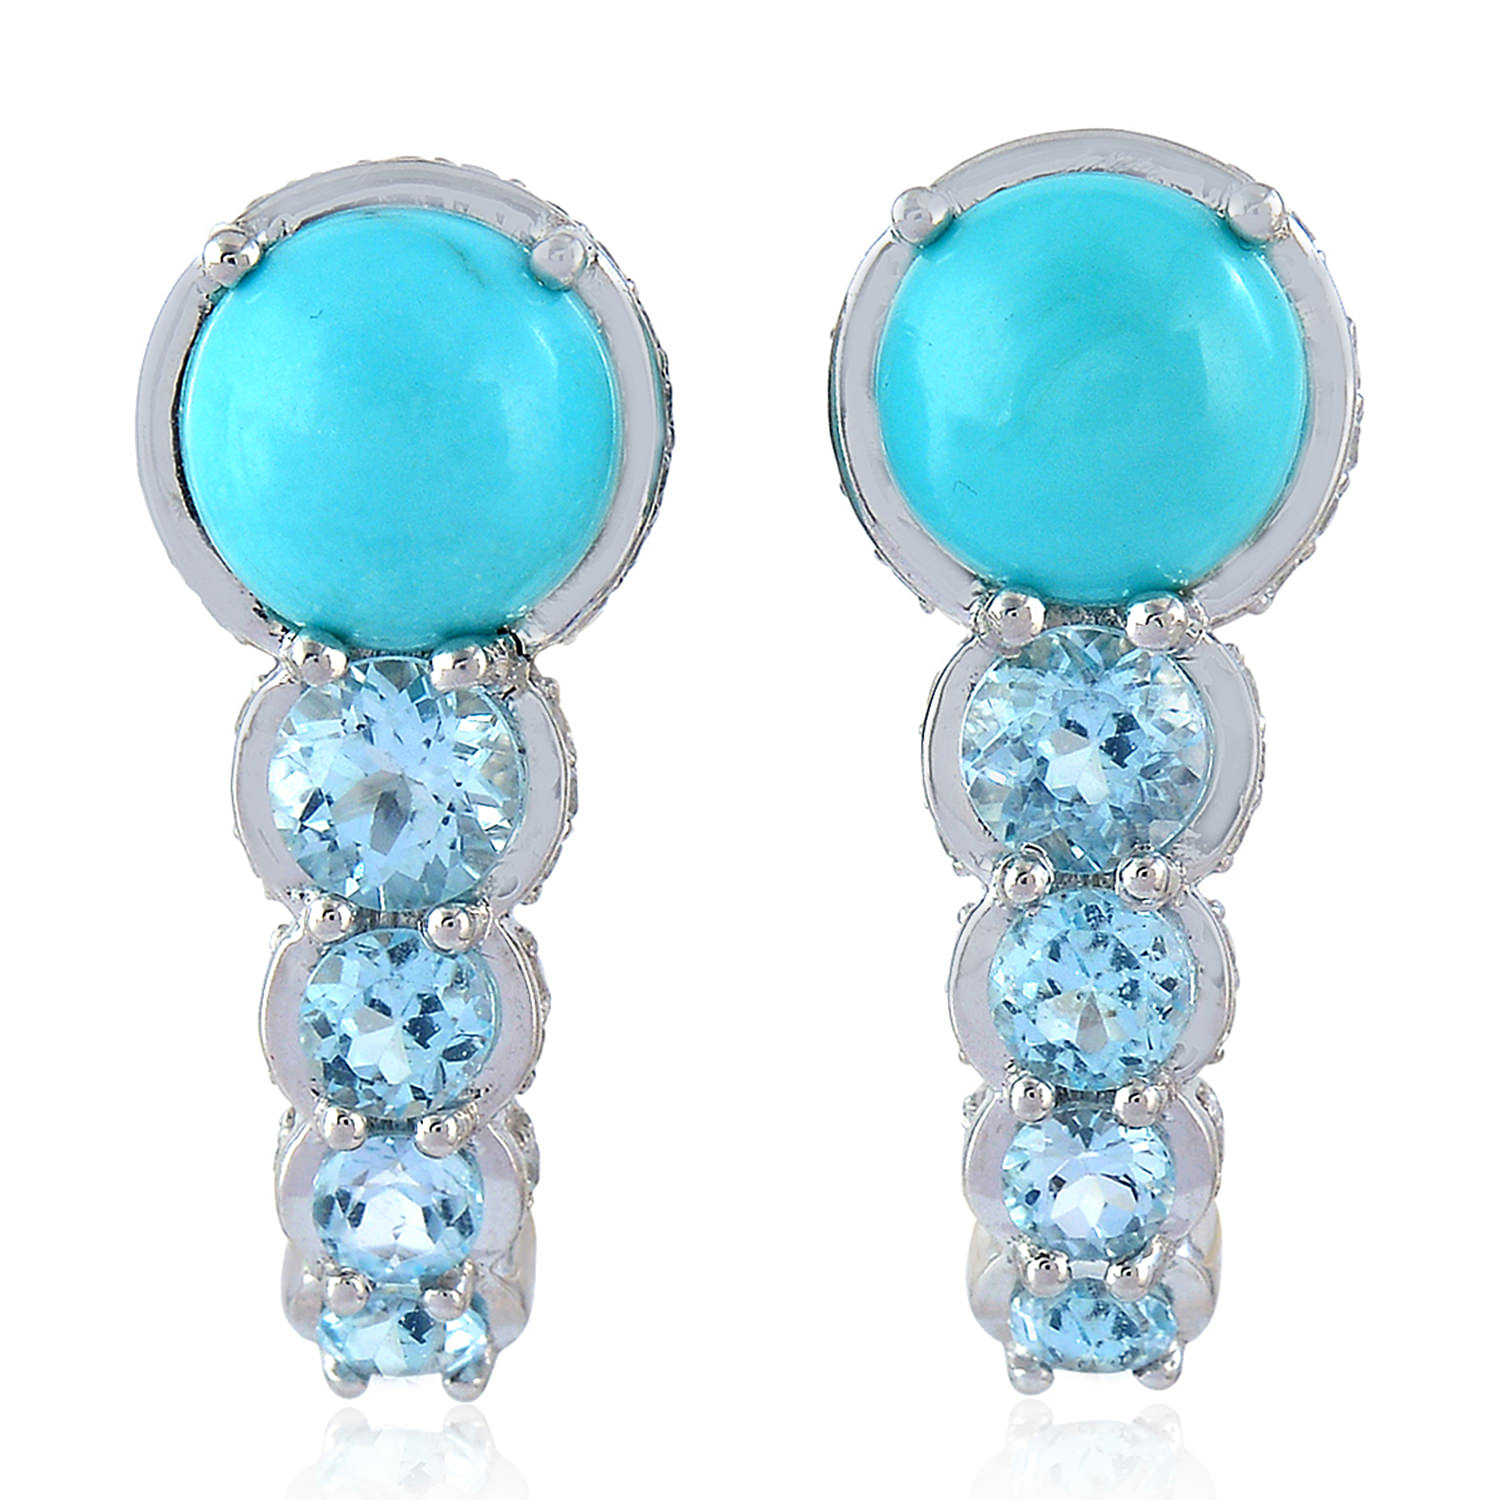 Artisan Women's Silver / Blue 925 Sterling Silver With Turquoise & Blue Topaz Stud Earrings In Gray